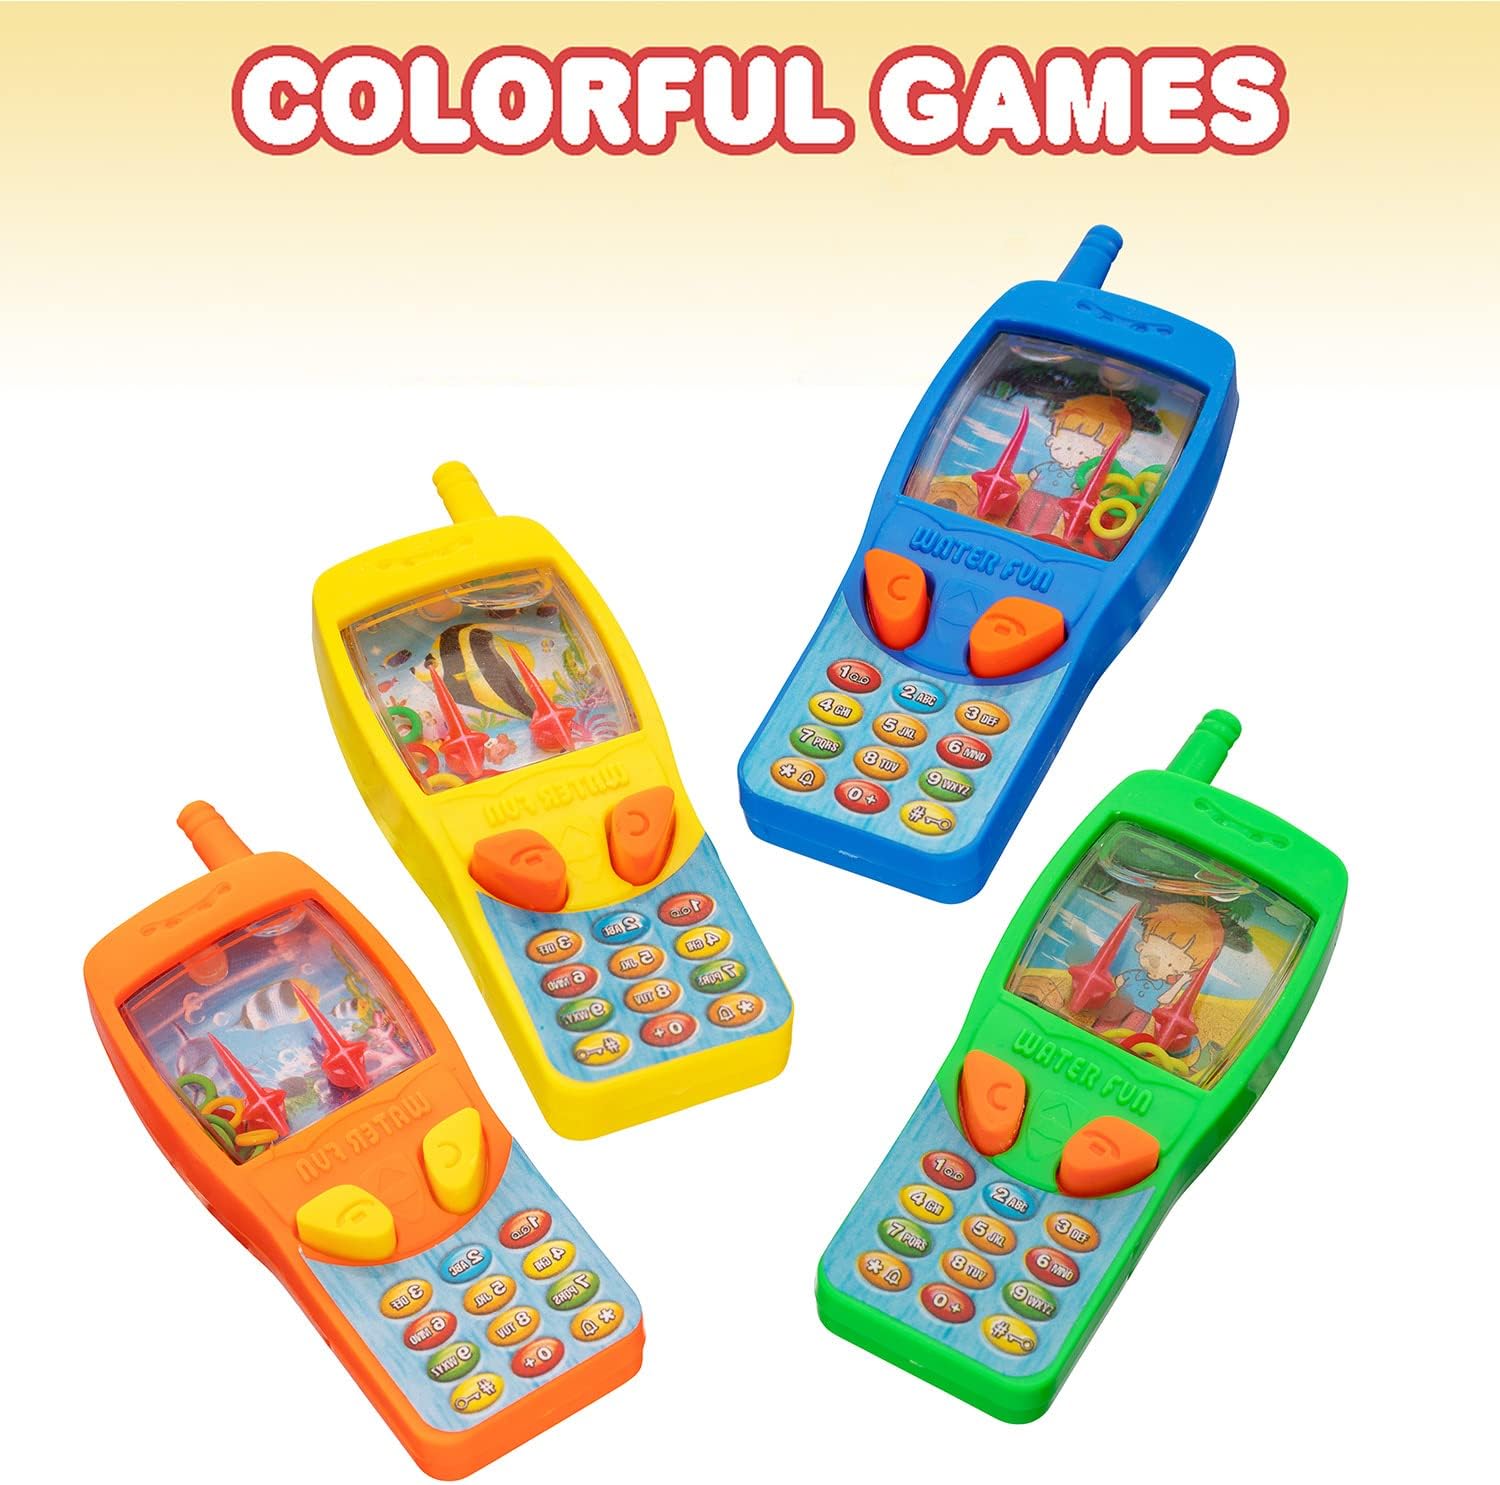 ArtCreativity 4 Inch Cellphone Water Ring Game - Pack of 12- Colorful Handheld Phone Game for Kids - Fun Birthday Party Favors for Children, Contest Prize - Great Gift Idea for Boys, Girls, Toddlers